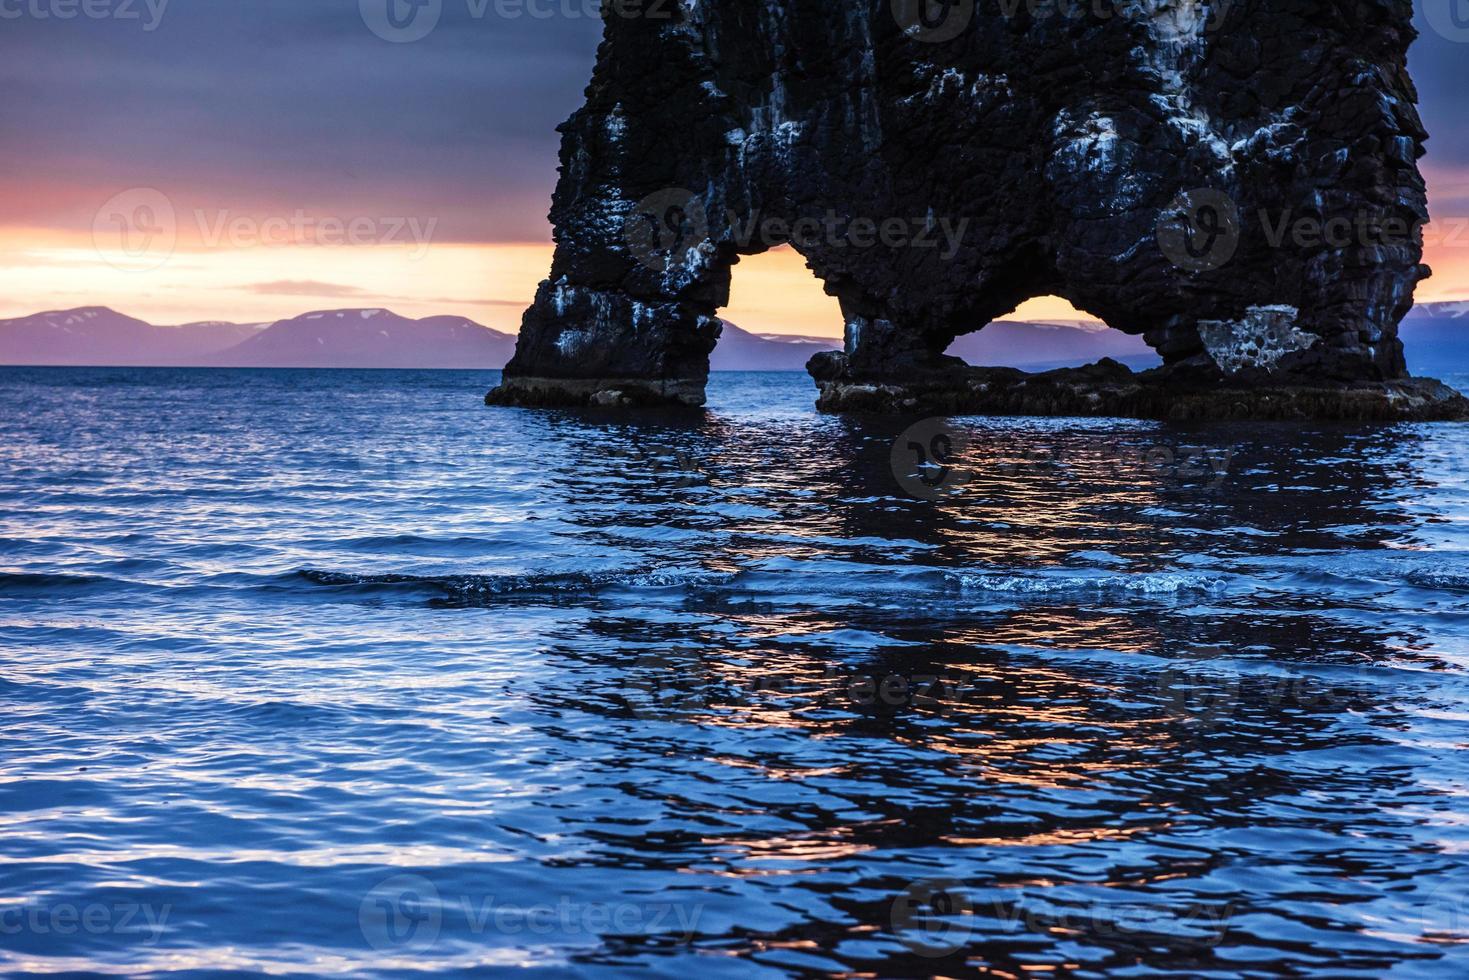 Hvitserkur is a spectacular rock in the sea on the Northern coast of Iceland. Legends say it is a petrified troll. On this photo Hvitserkur reflects in the sea water after the midnight sunset